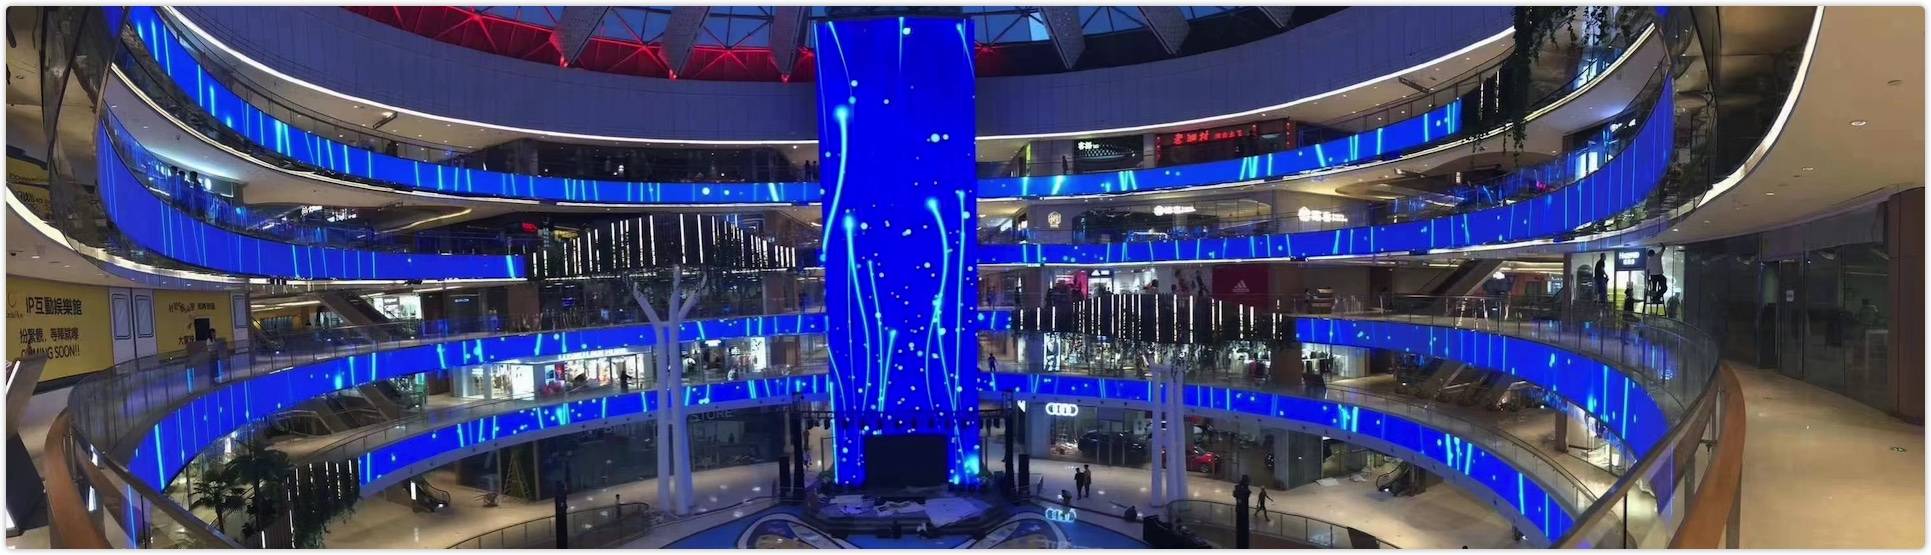 indoor fixed transparent led display yonwaytech